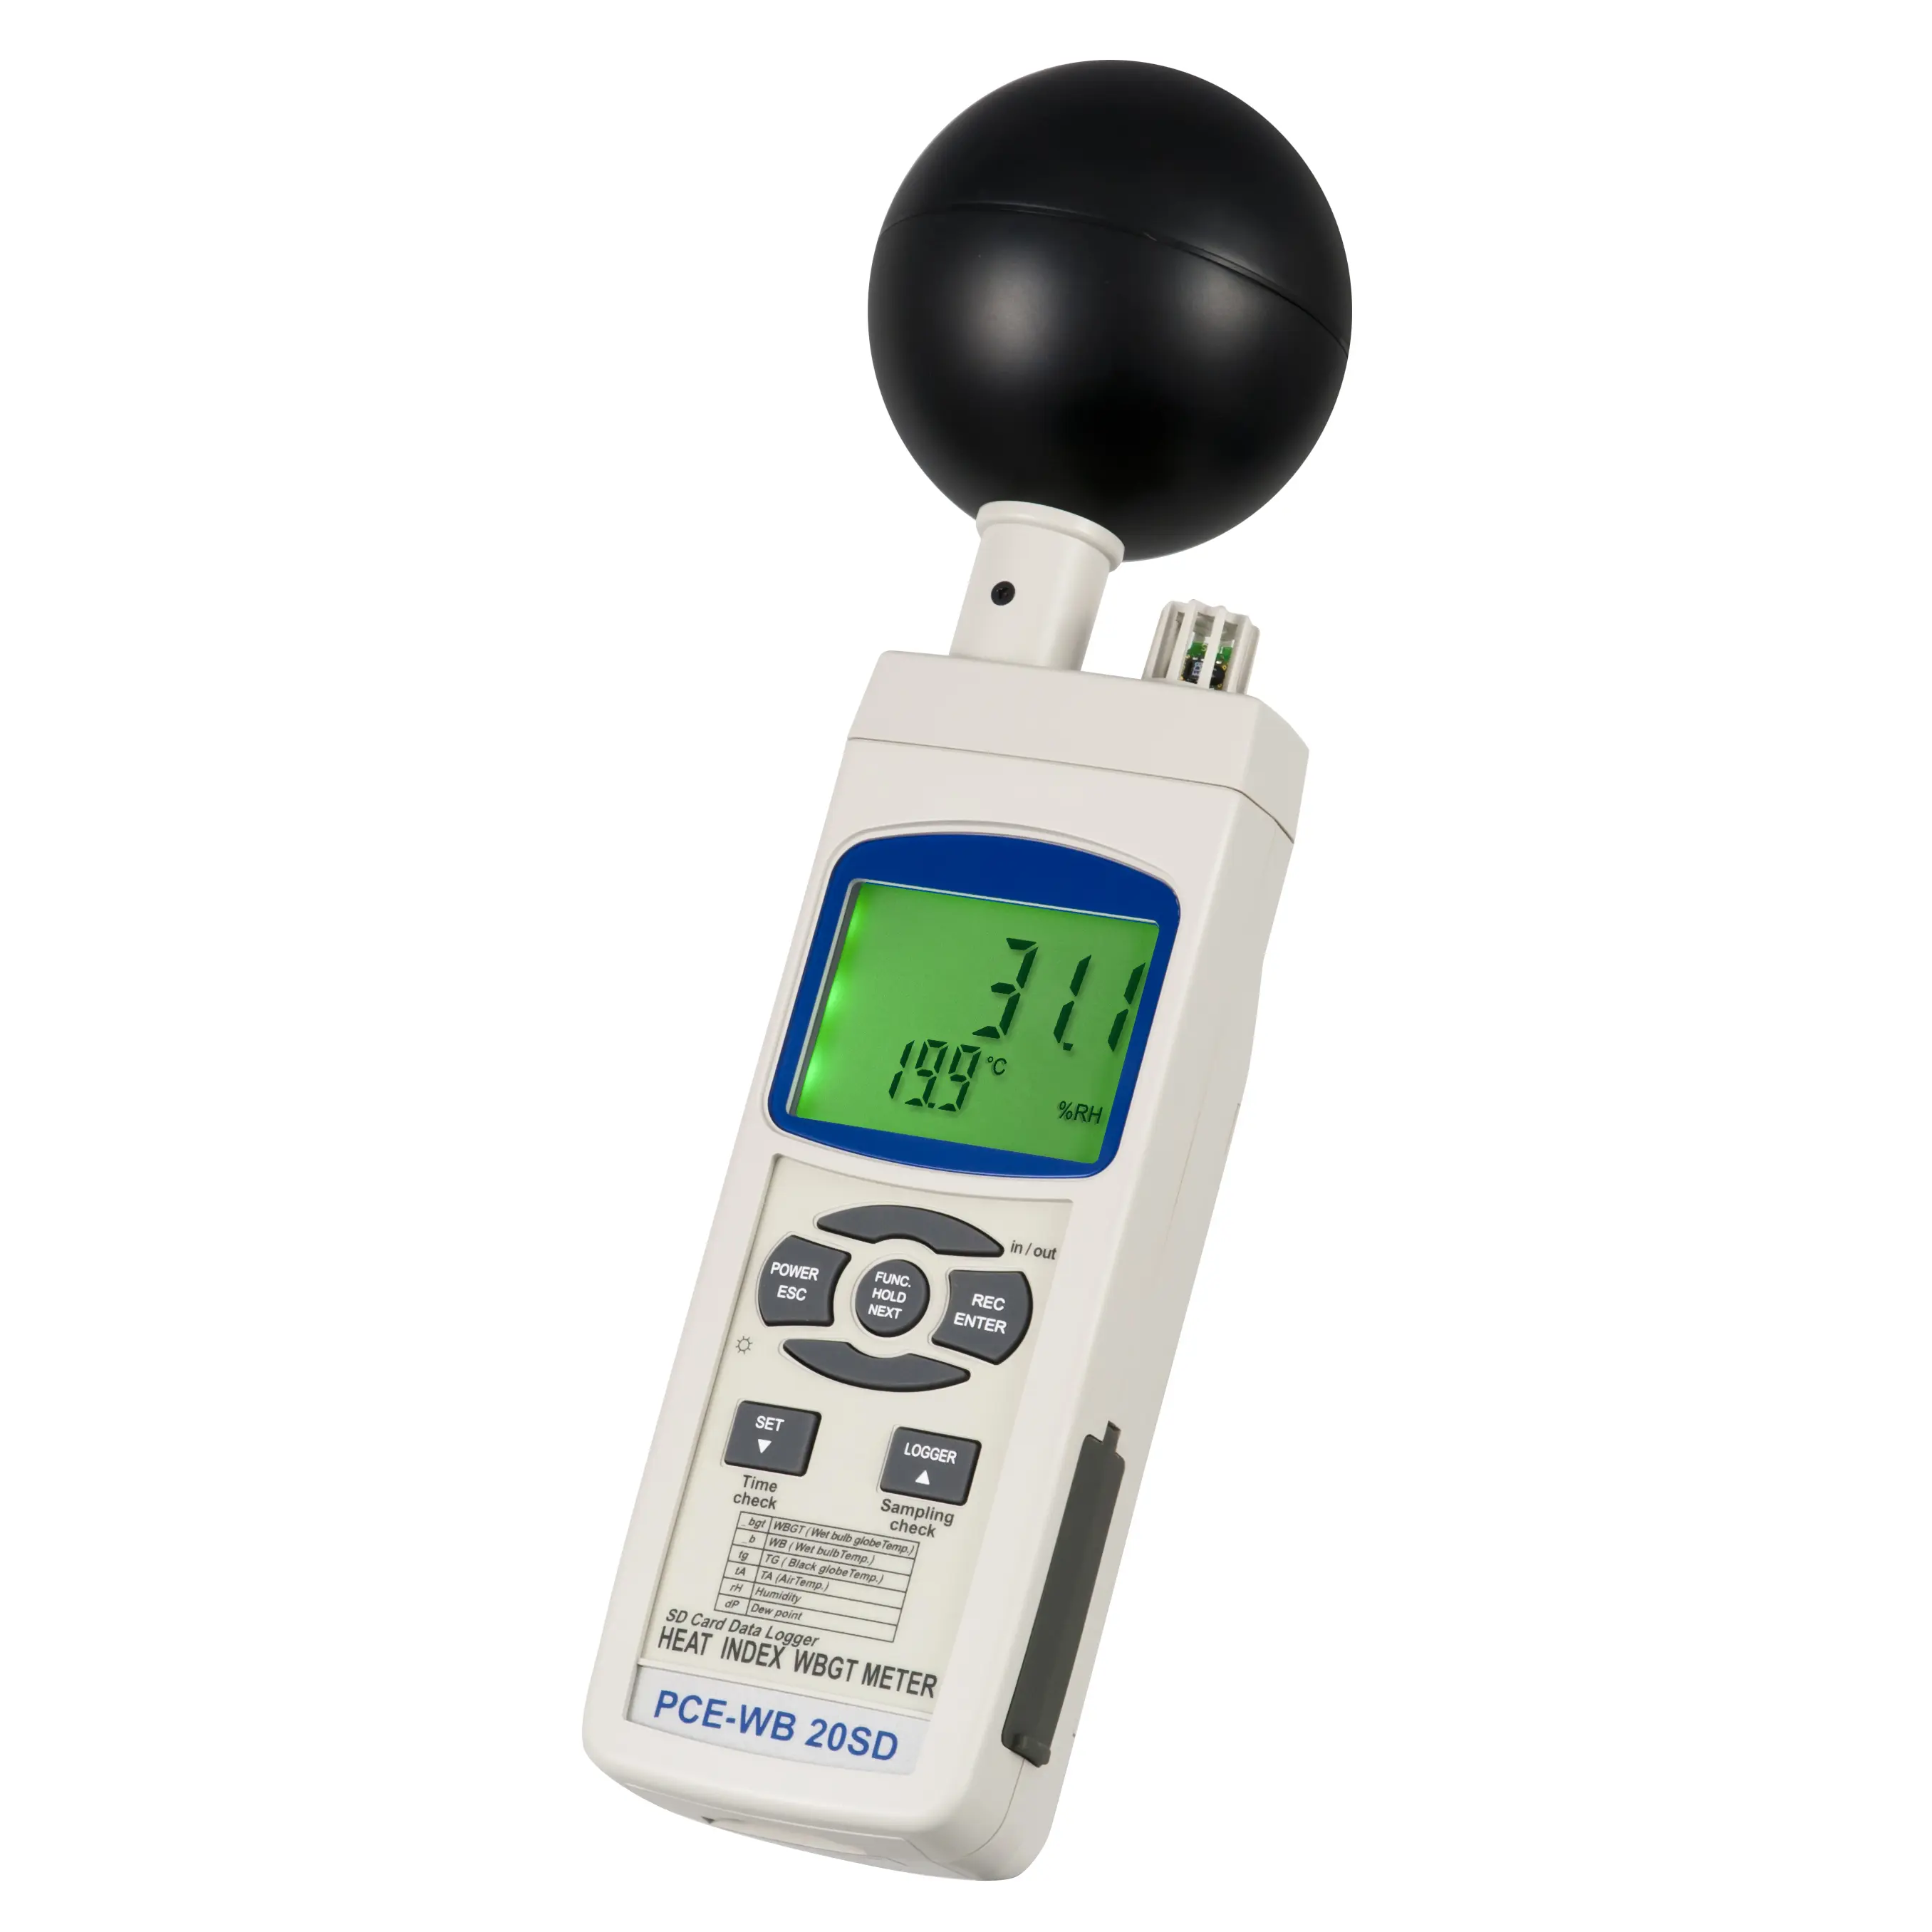 Multifunctional Environmental Meter - with Temperature, Humidity